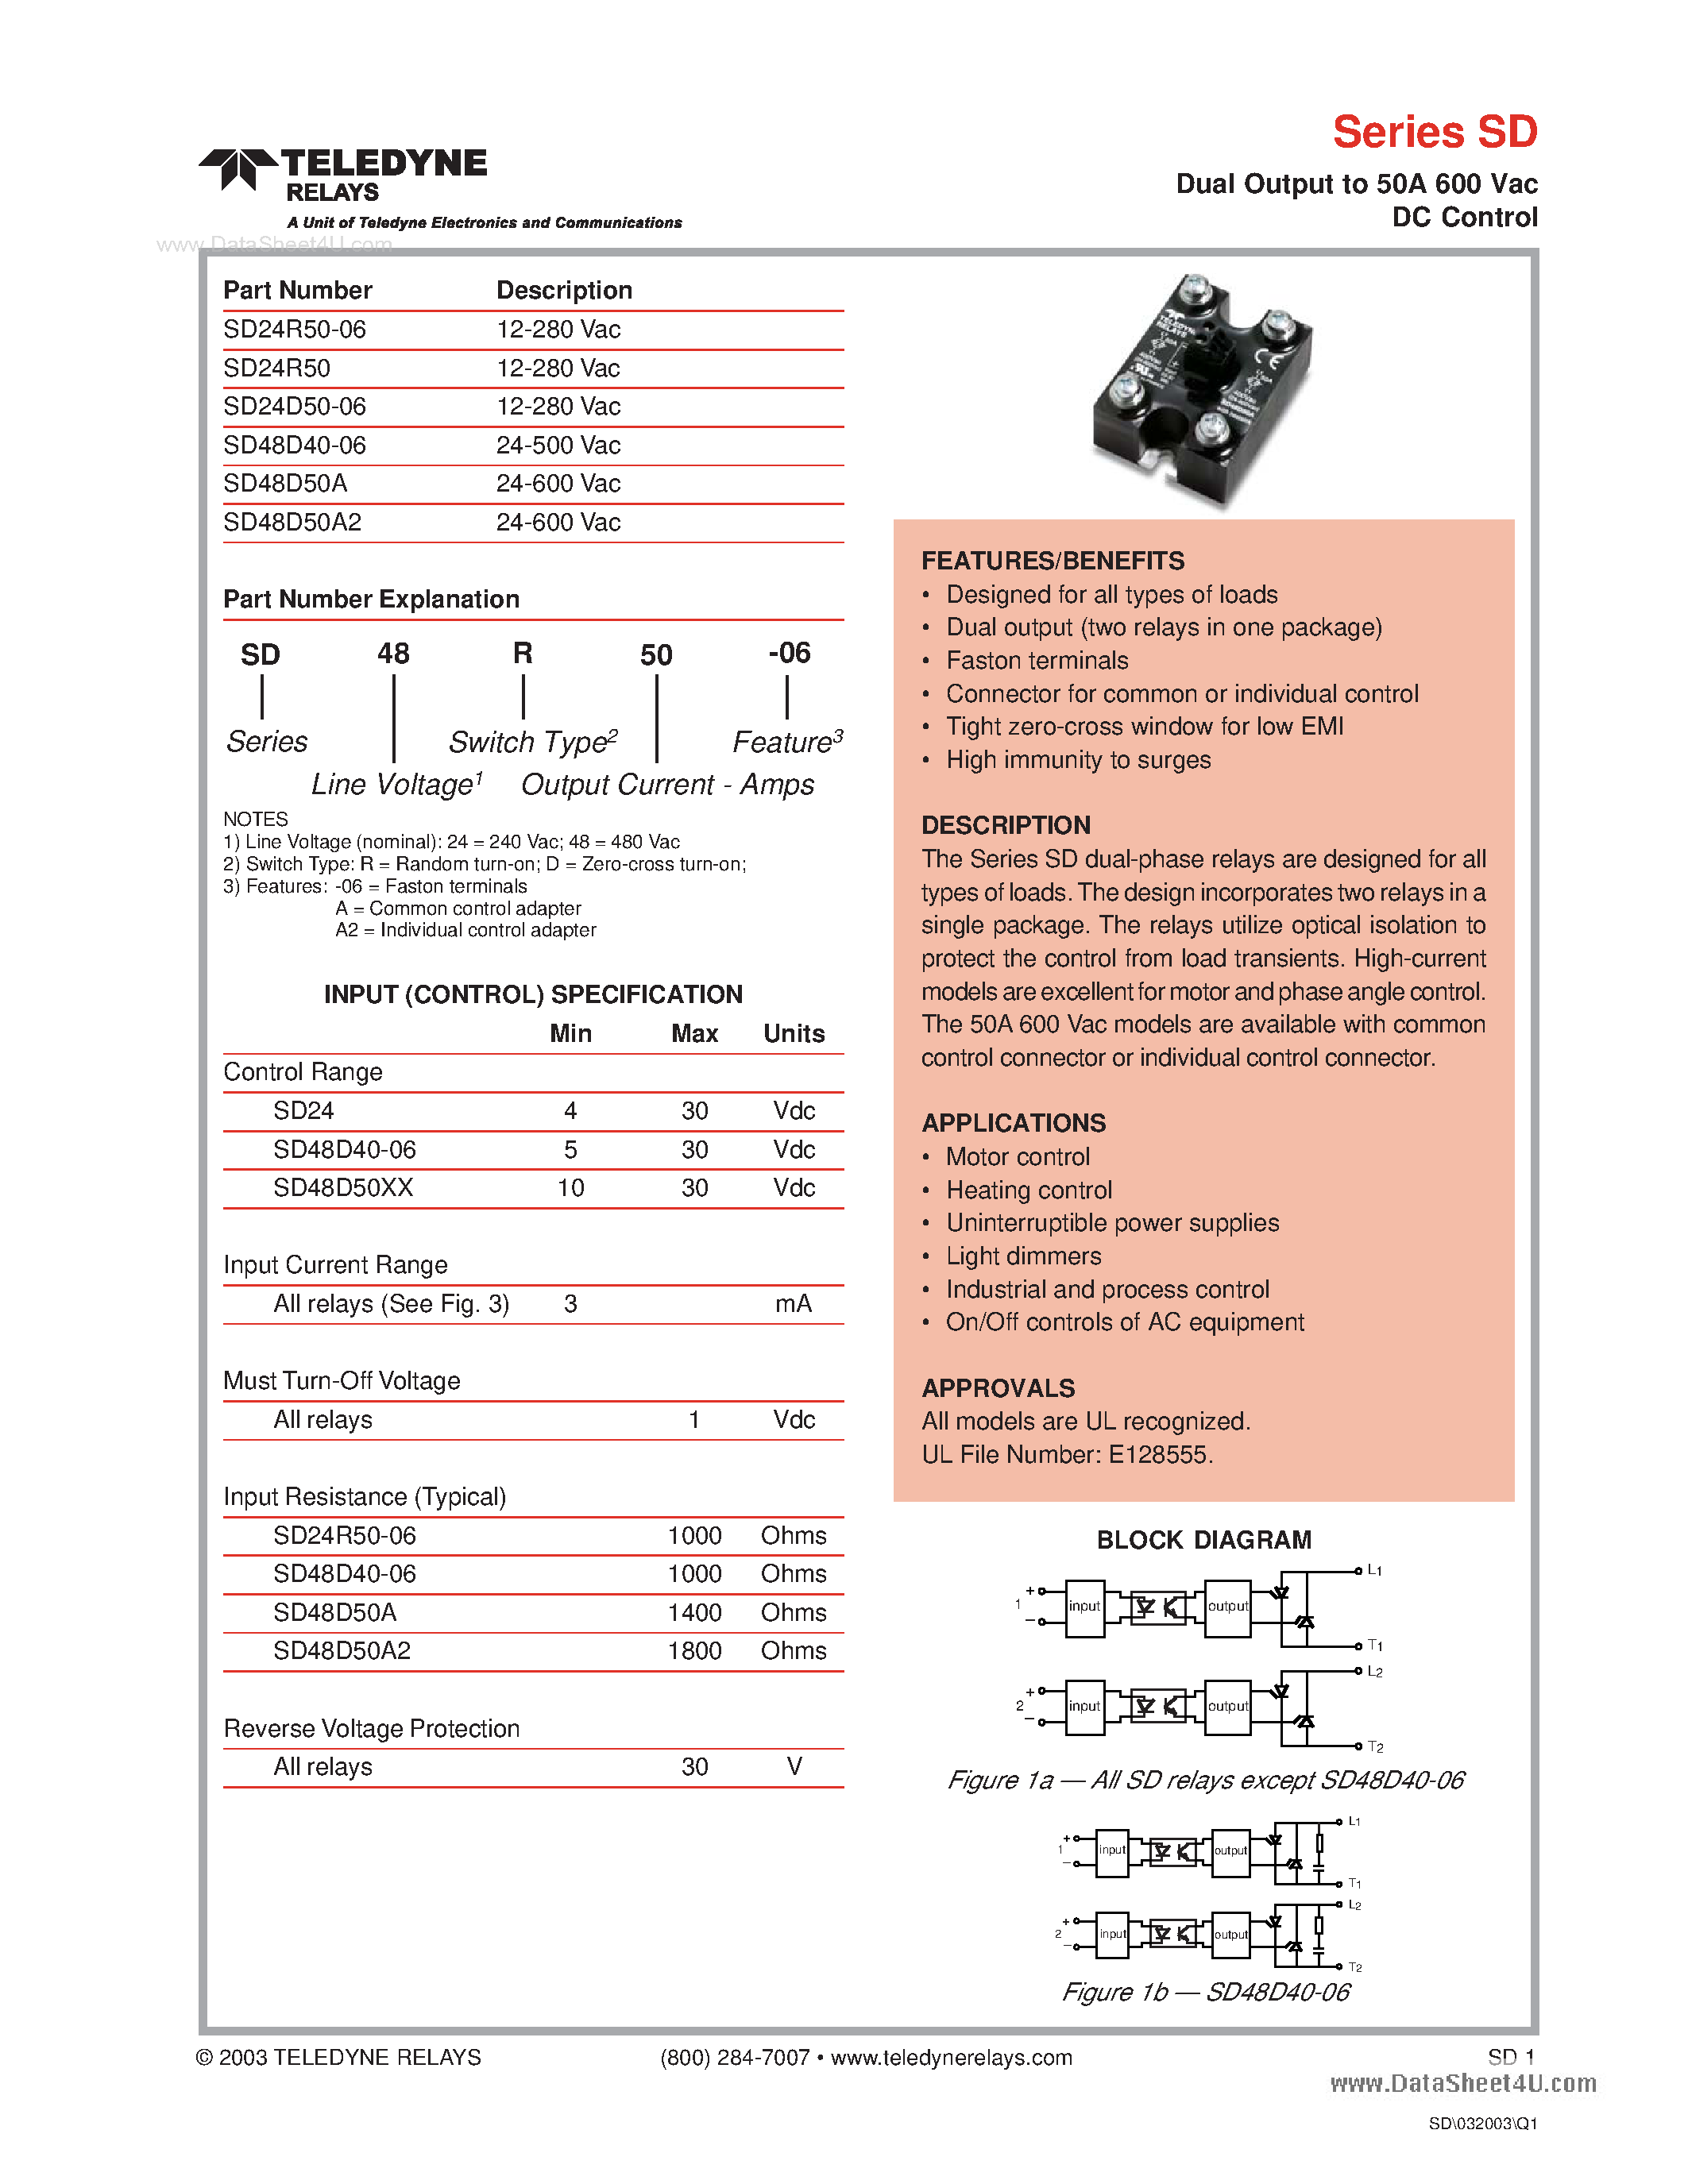 Datasheet SD24D50-06 - (SD24Dxx) Dual Output to 50A 600 Vac DC Control page 1